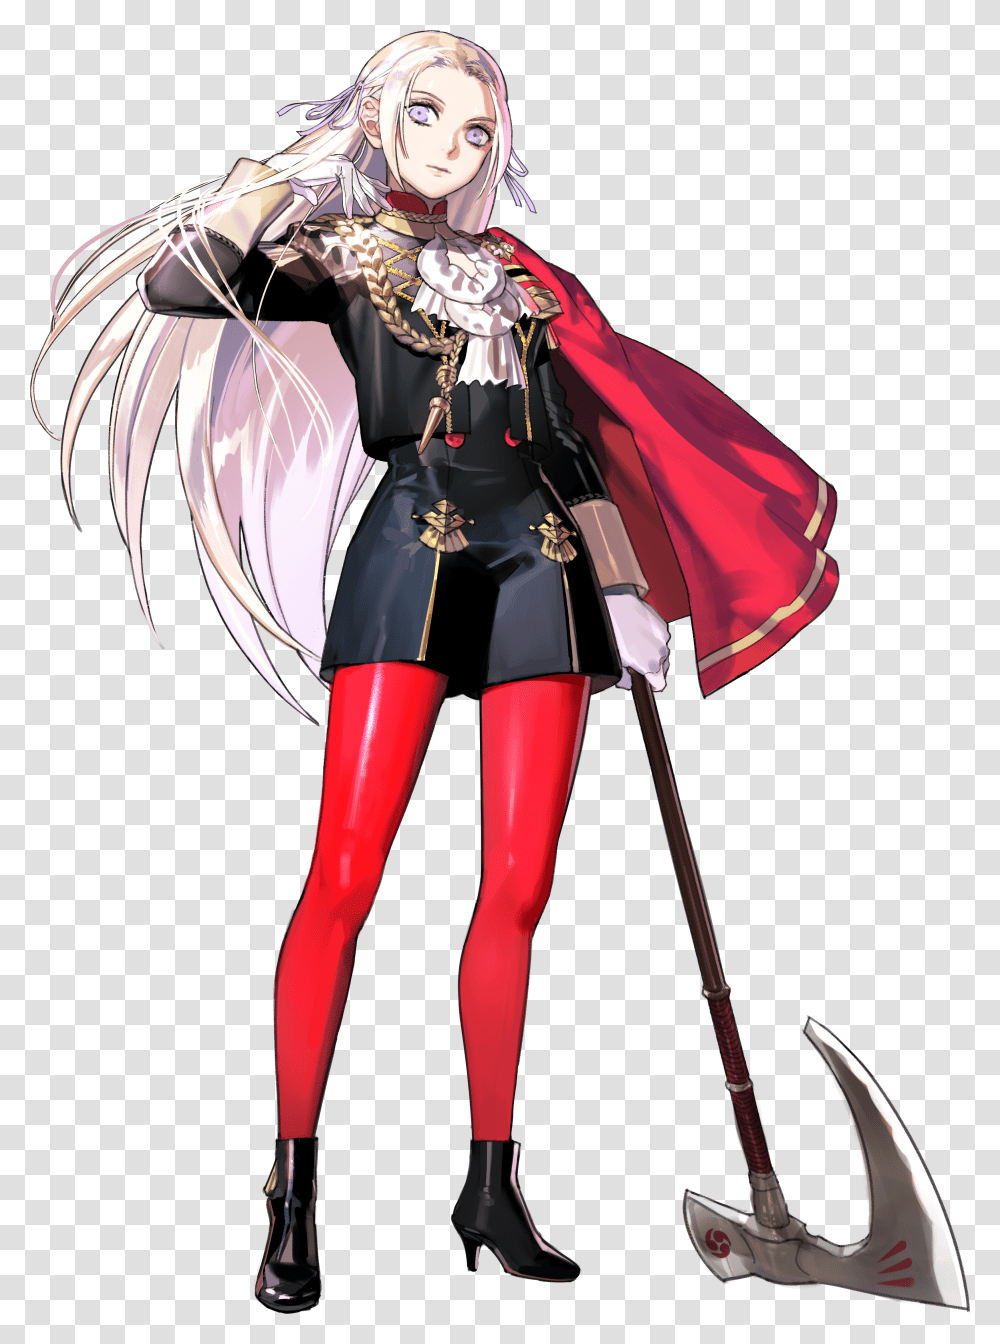 Official Artwork Of Edelgard From Fire Emblem Fire Emblem Fire Emblem Three Houses Edelgard Transparent Png